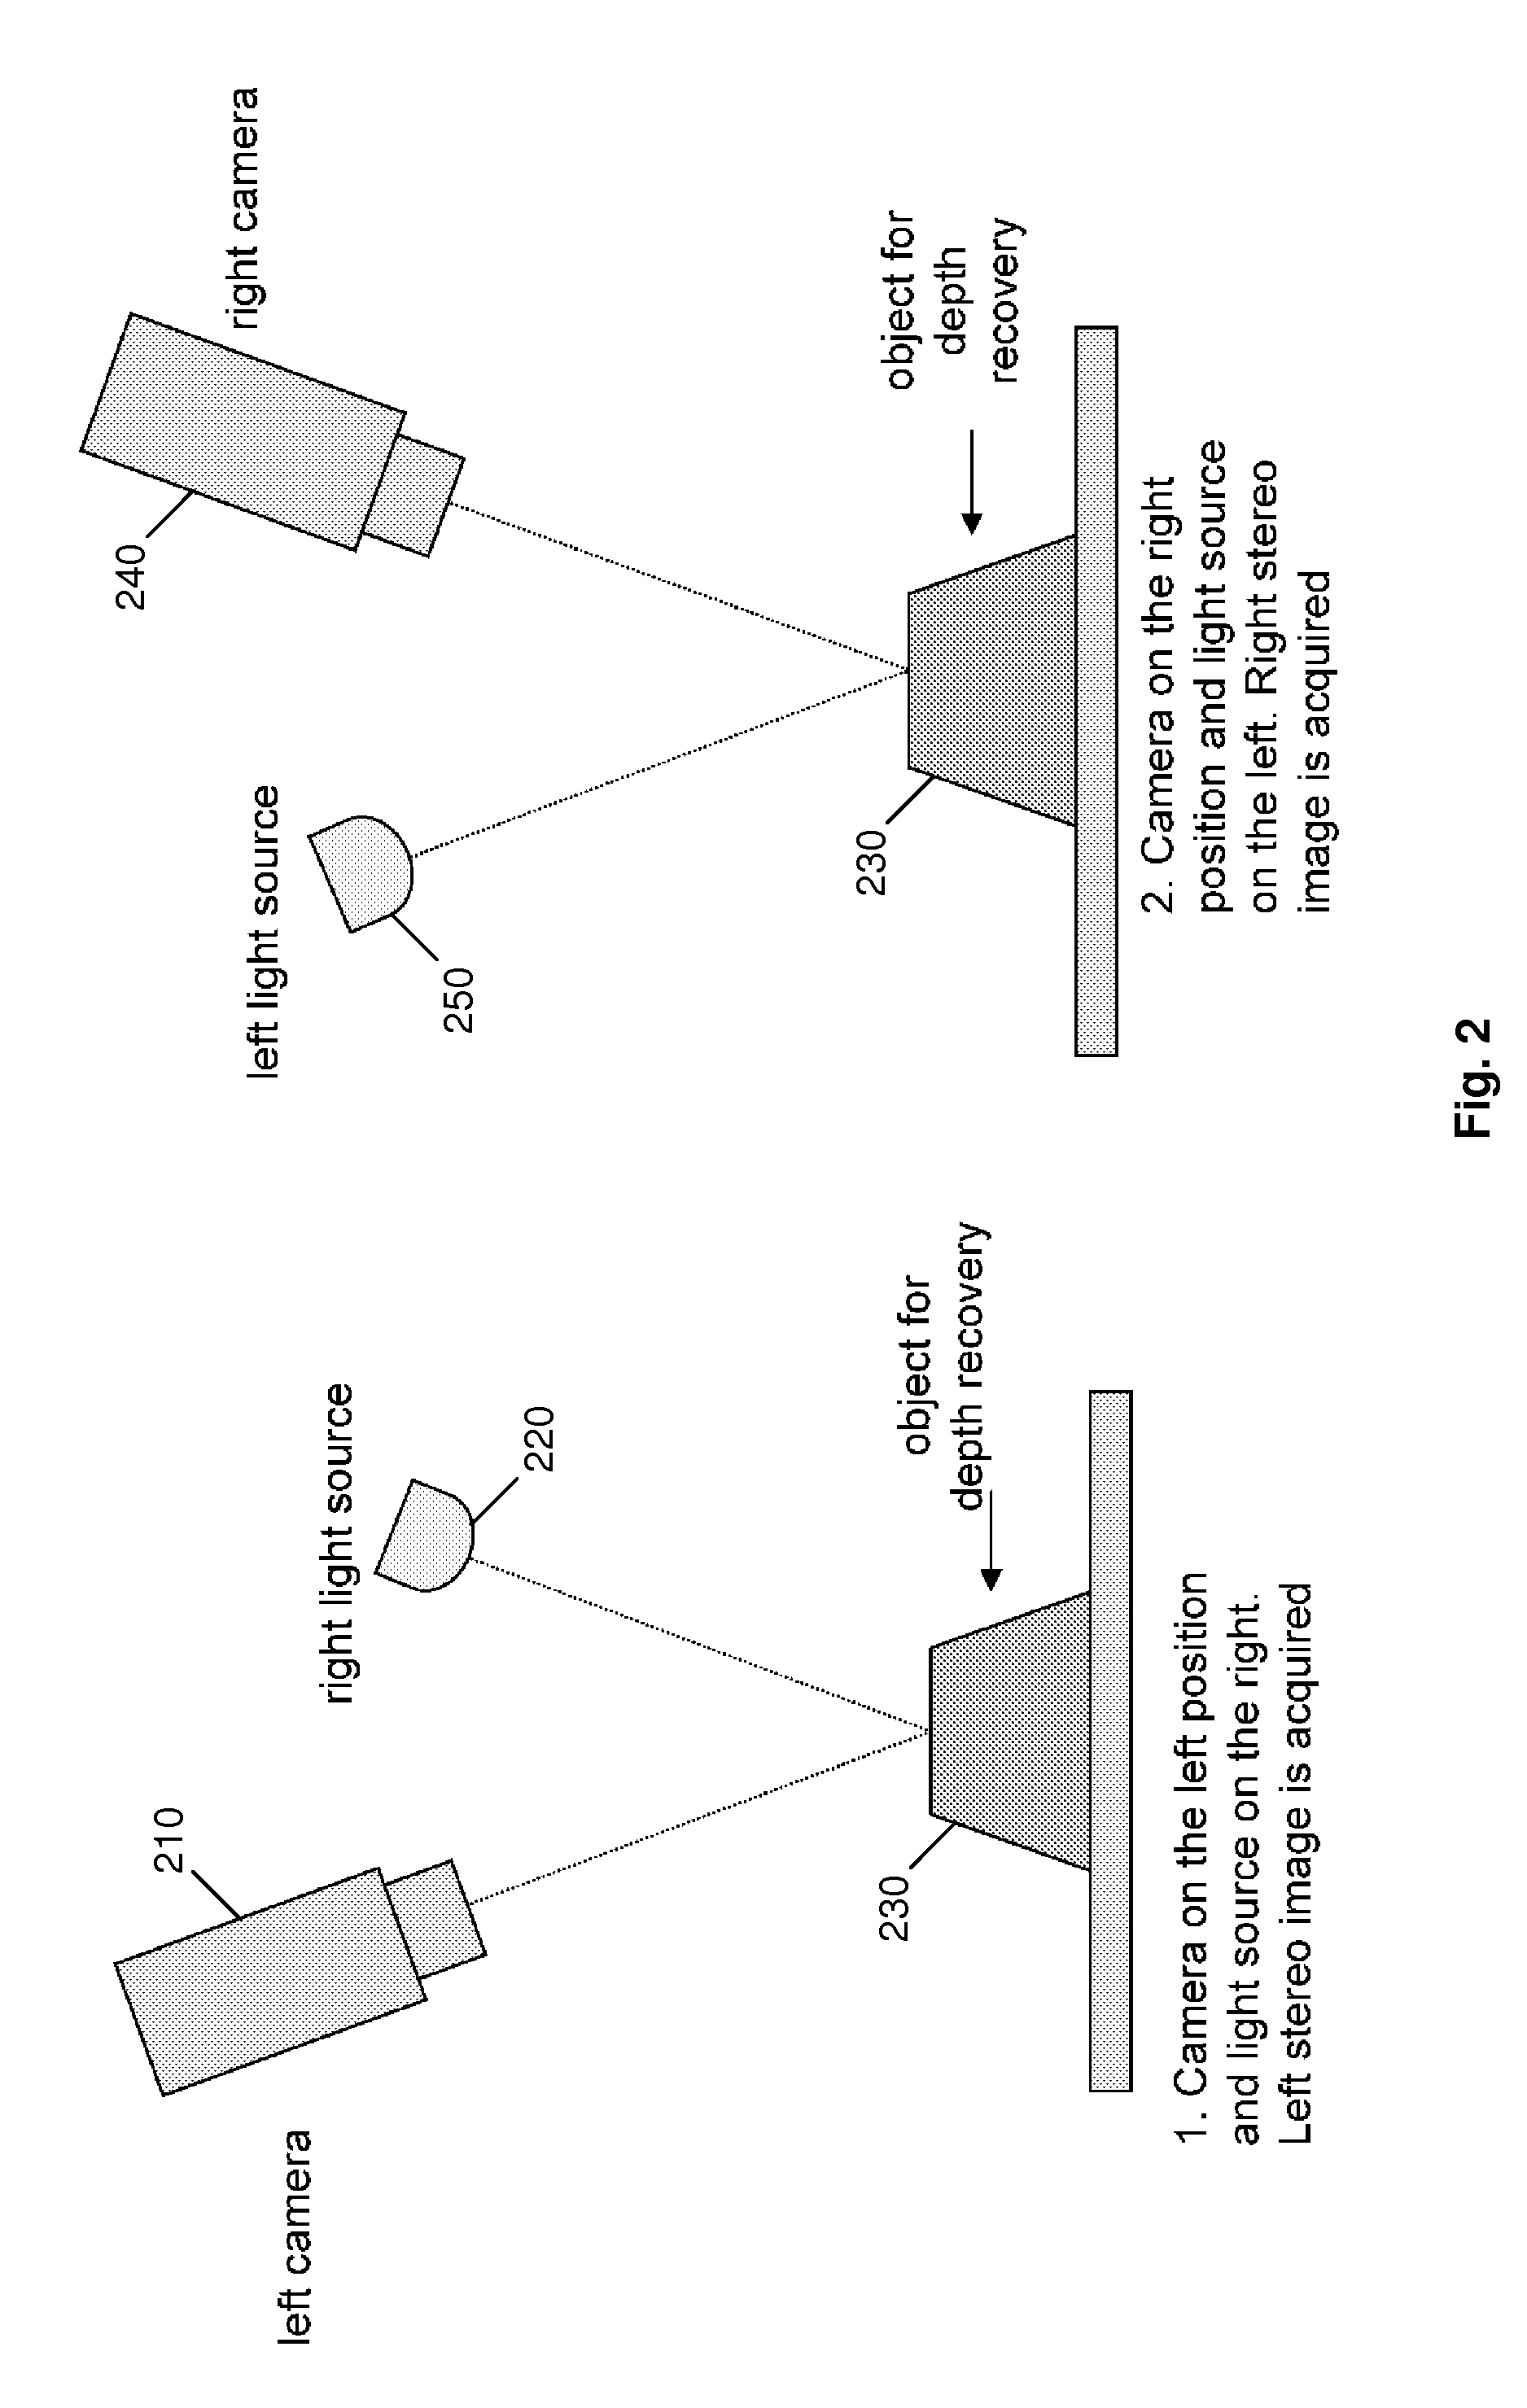 Fast Three Dimensional Recovery Method and Apparatus